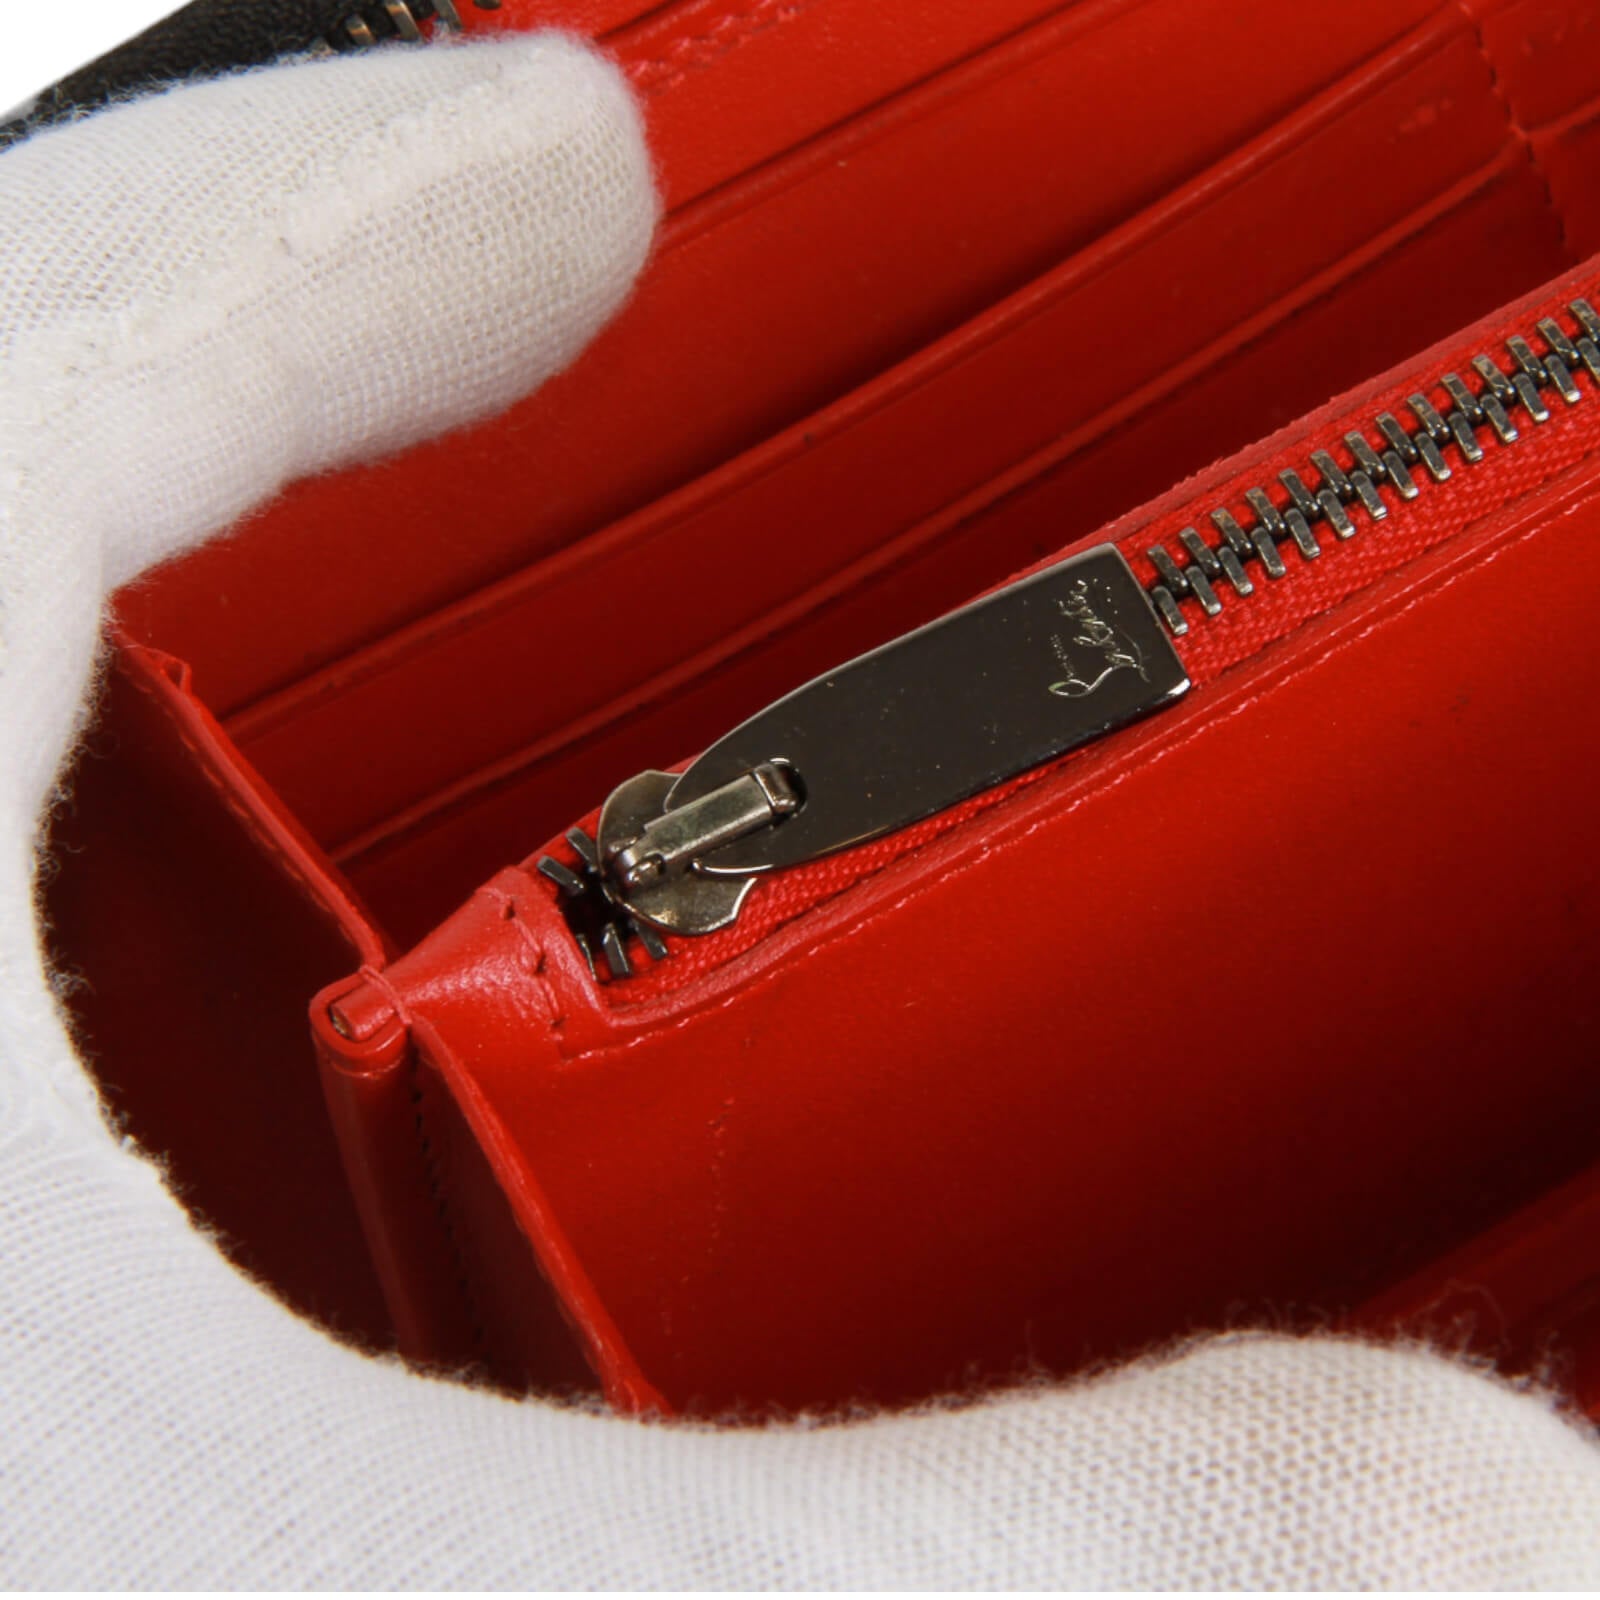 Panettone - Wallet - Calf leather and spikes - Black - Christian Louboutin